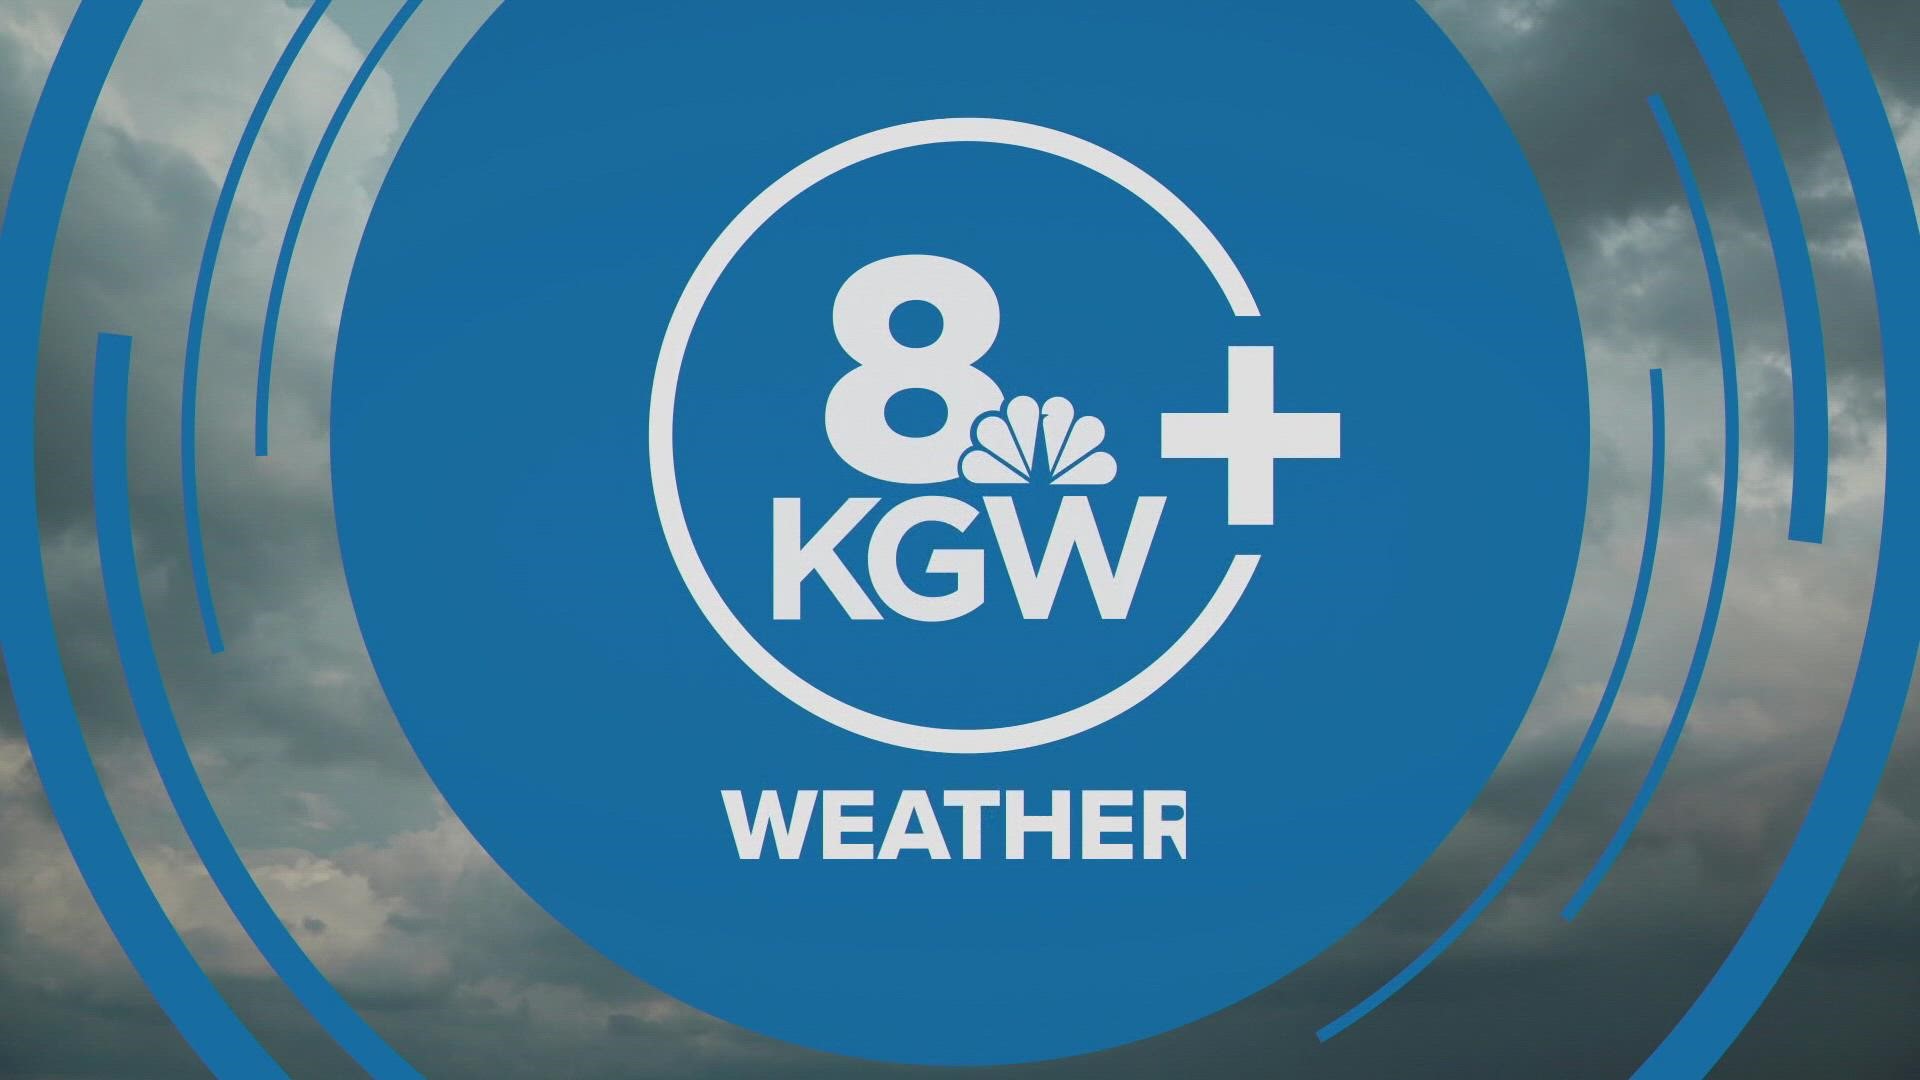 The weekend brings dry weather, but on Monday, a cold system brings rain and snow to higher elevations. KGW meteorologist Rod Hill explains the snow chance.